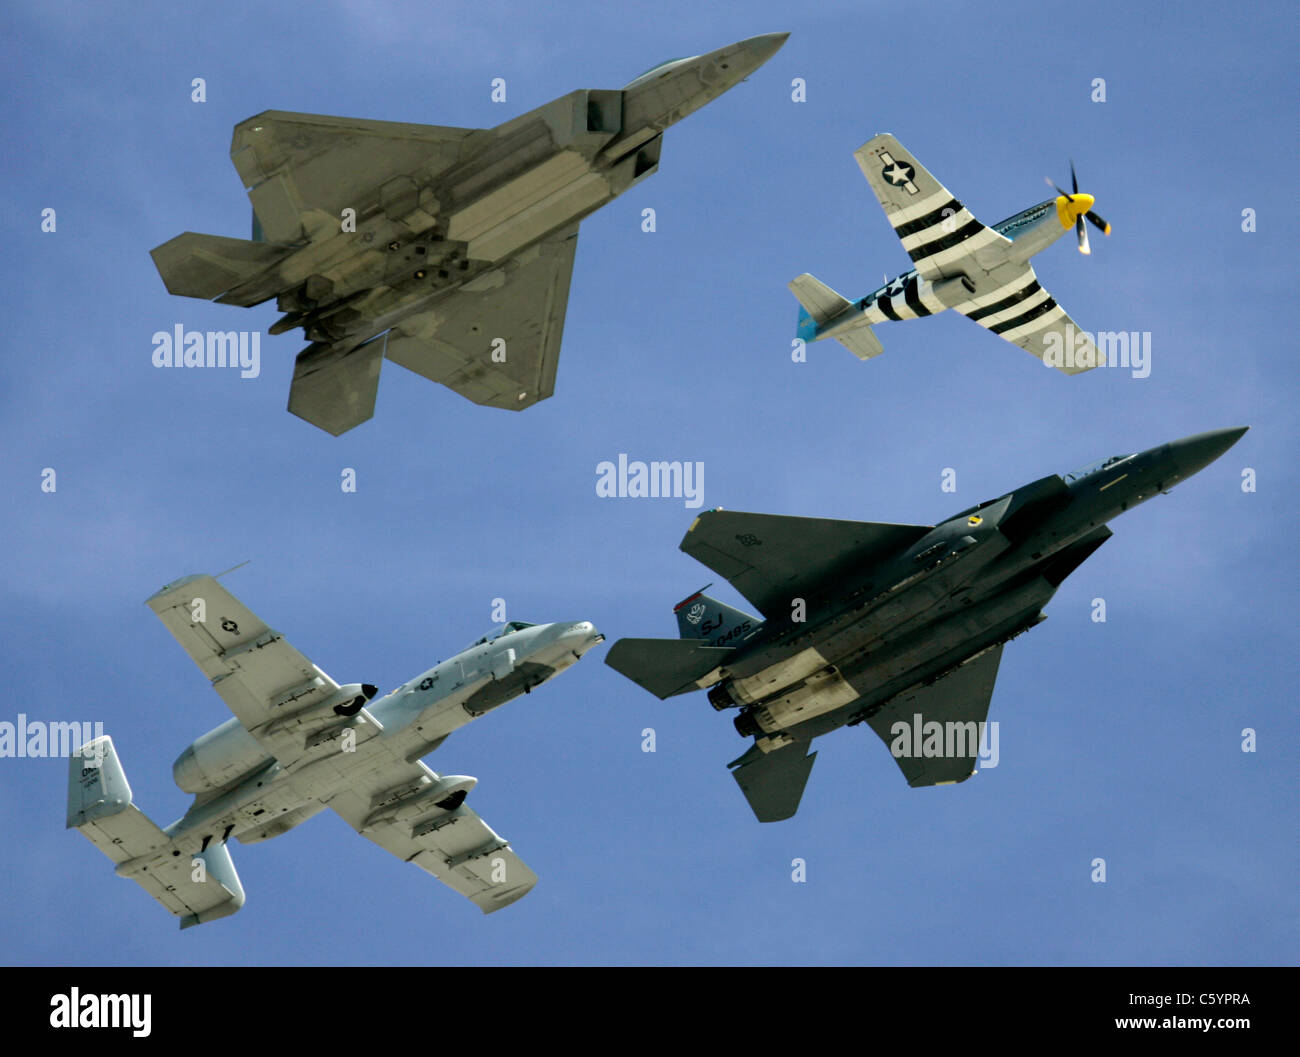 Aircraft from top, clockwise, F-22 Raptor, a World War II era P-51 Mustang, an F-15 Eagle, and an A-10 Thunderbolt Stock Photo